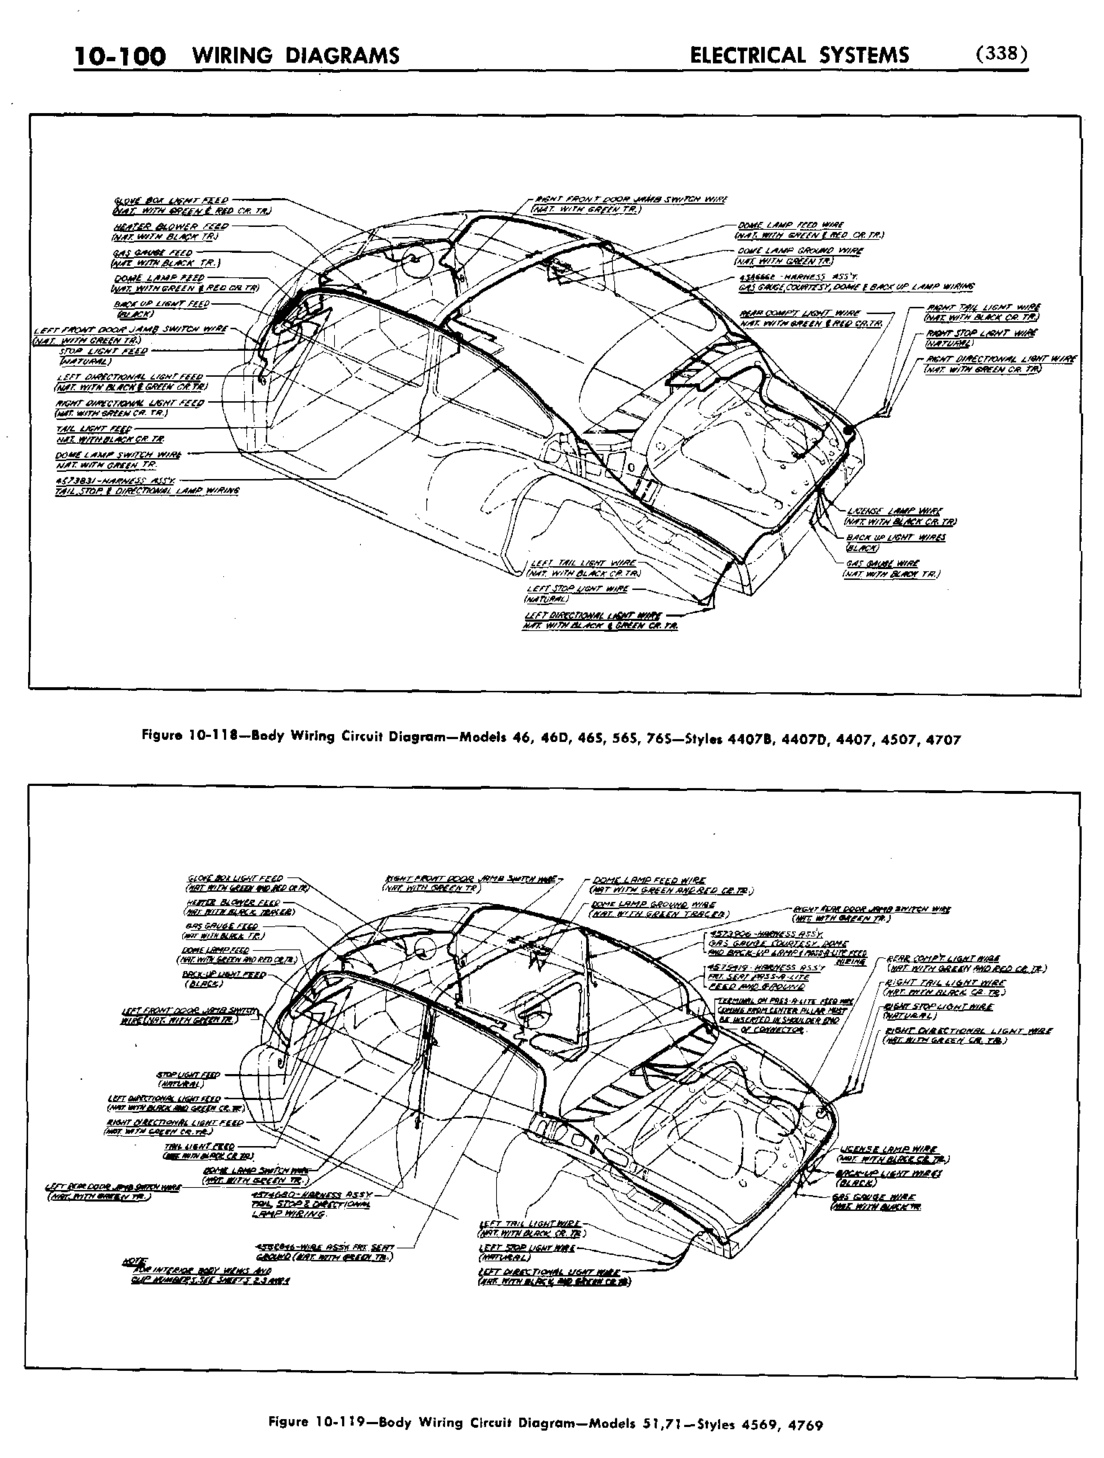 n_11 1950 Buick Shop Manual - Electrical Systems-100-100.jpg